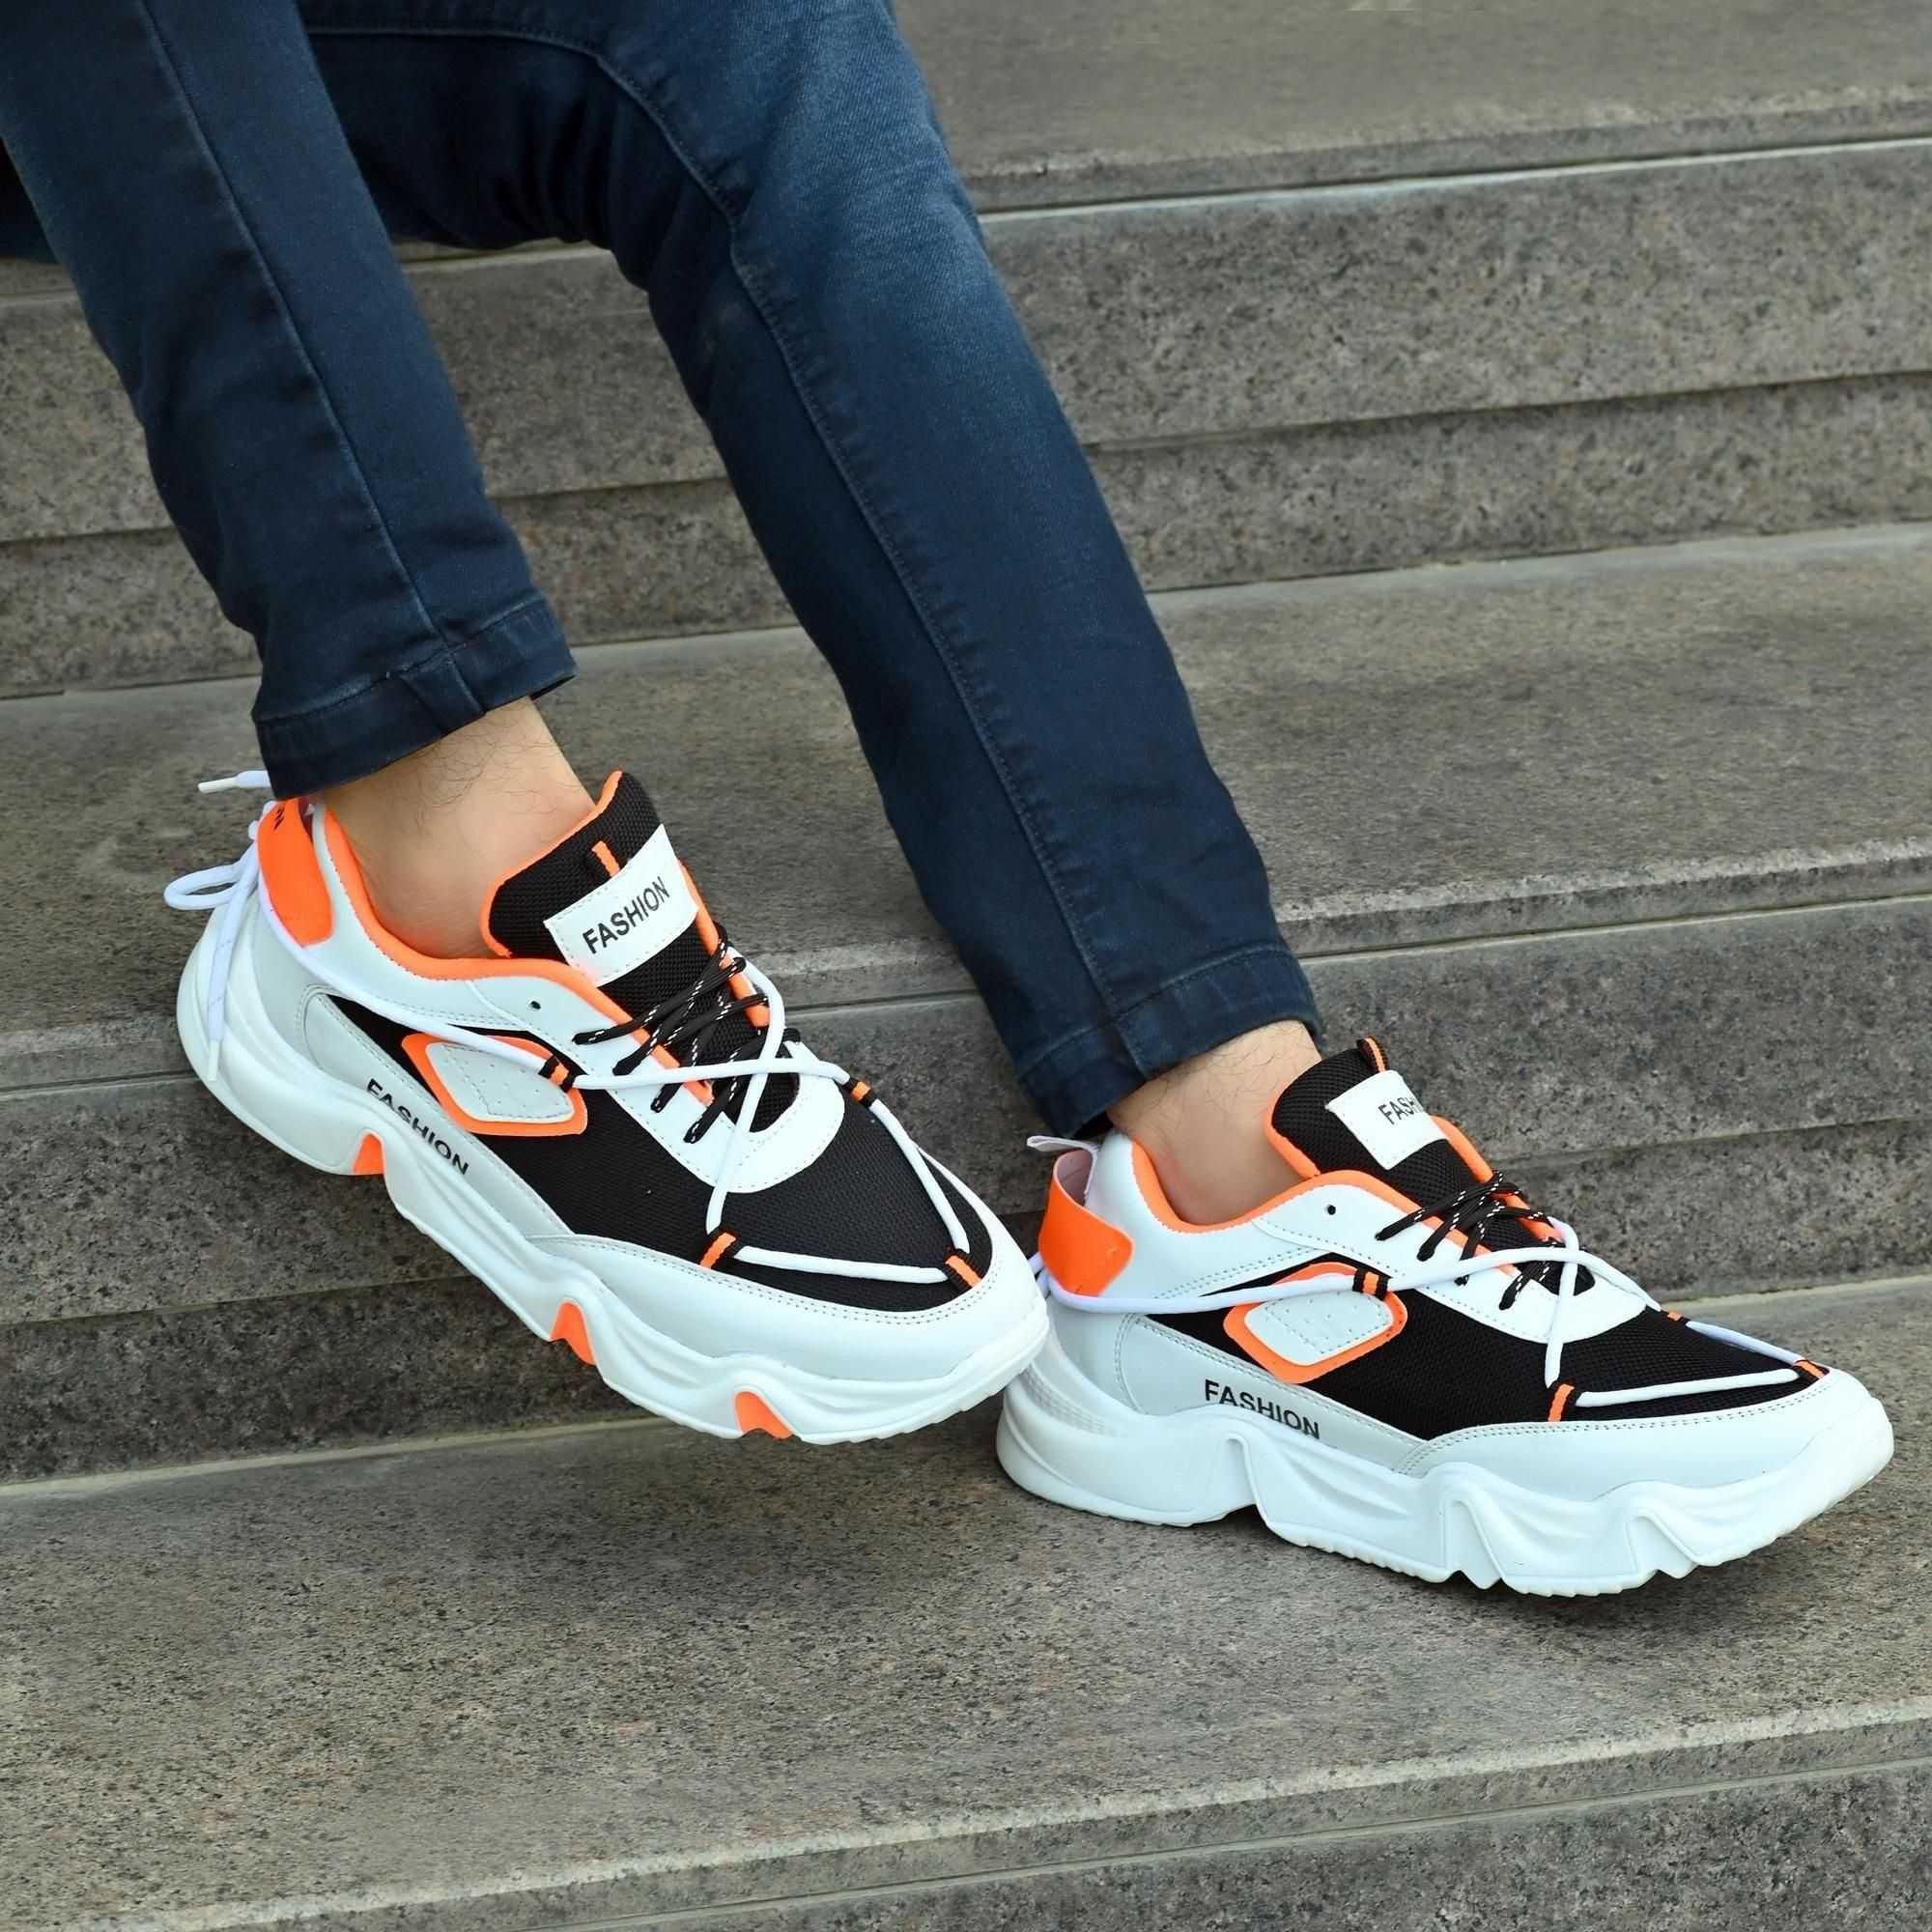 AM PM Light Weight Fashionable Sports Shoes